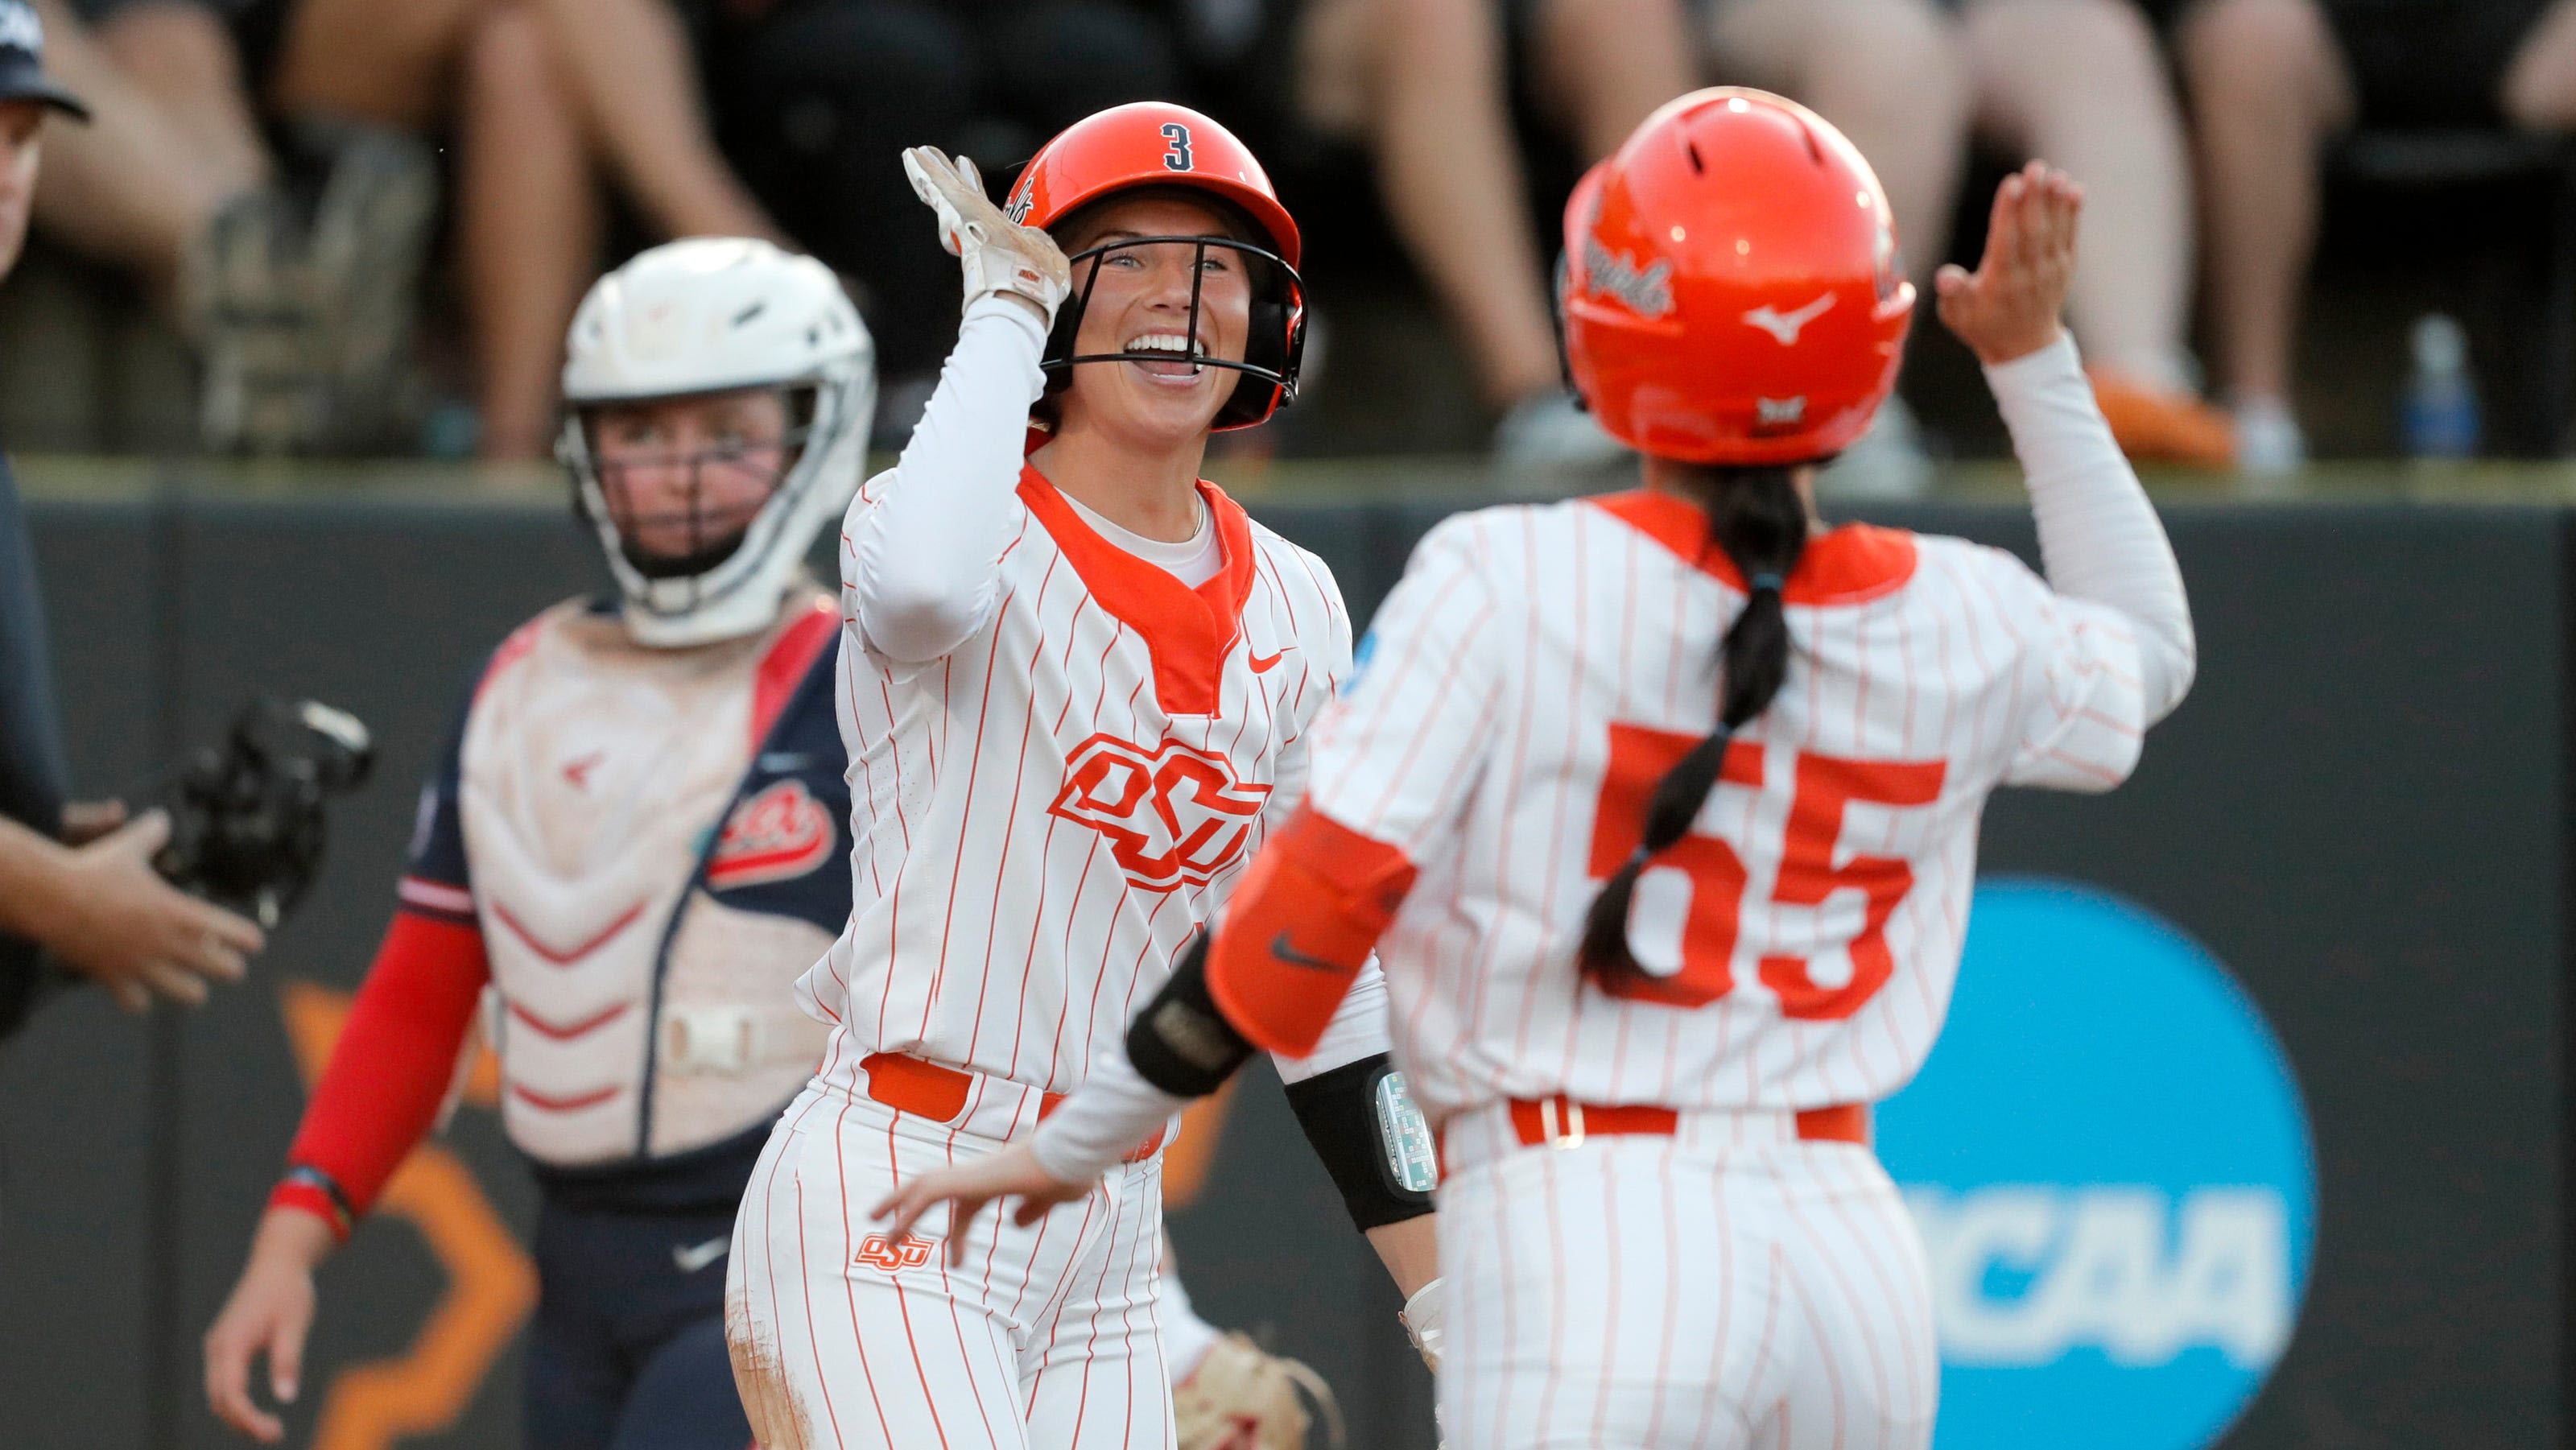 Oklahoma State softball vs Arizona: Game 2 time, TV channel change due to weather forecast